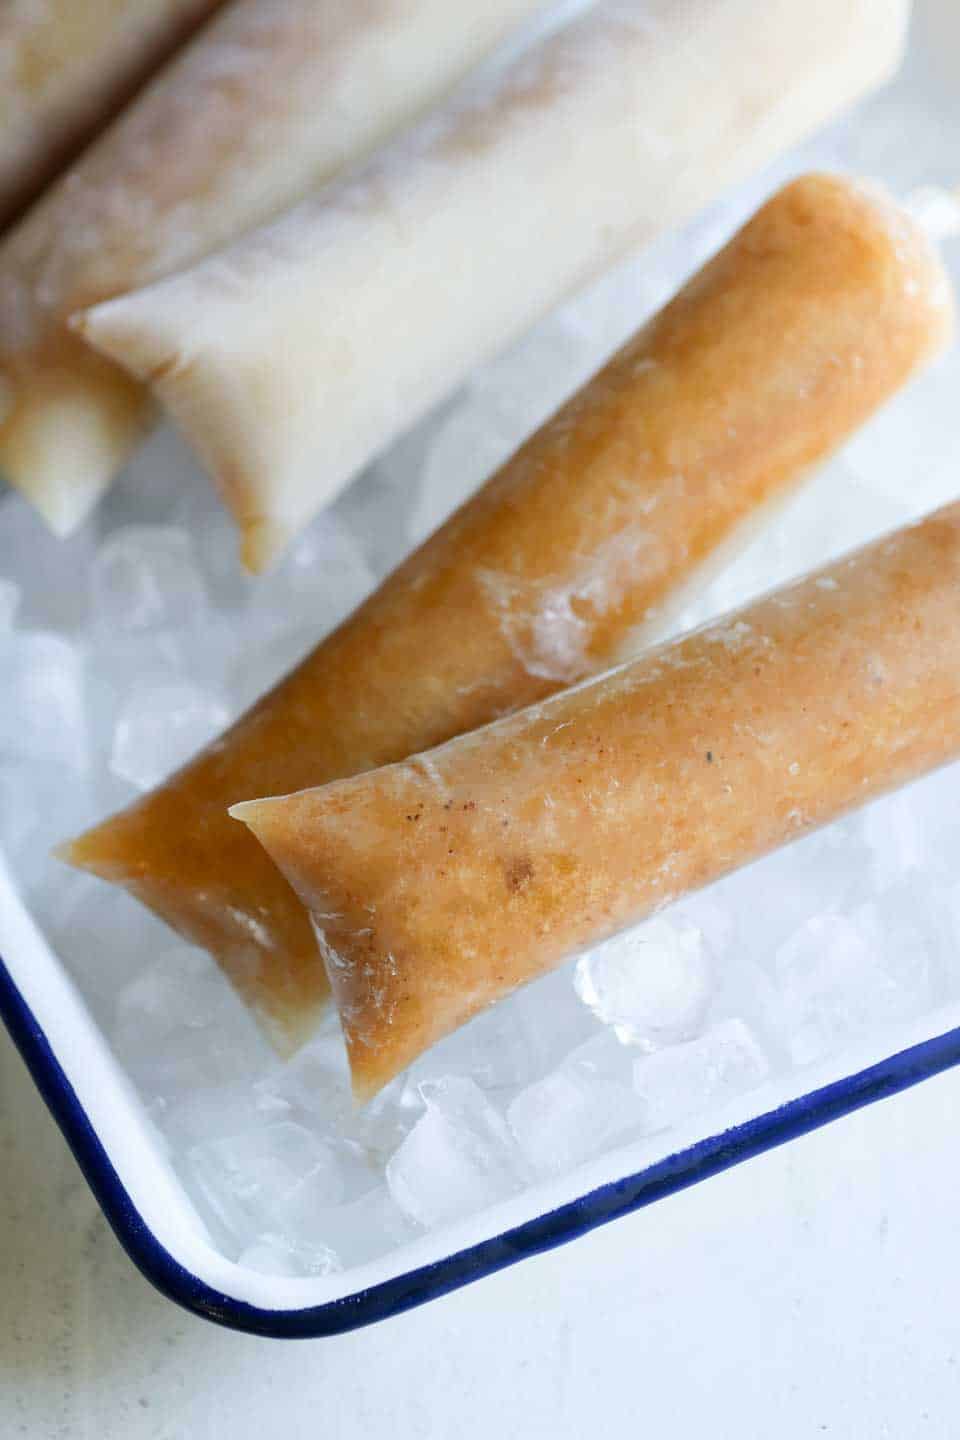 "Several tamarind ice pops laid out on a bed of crushed ice, keeping them cool and refreshing, perfect for a hot day